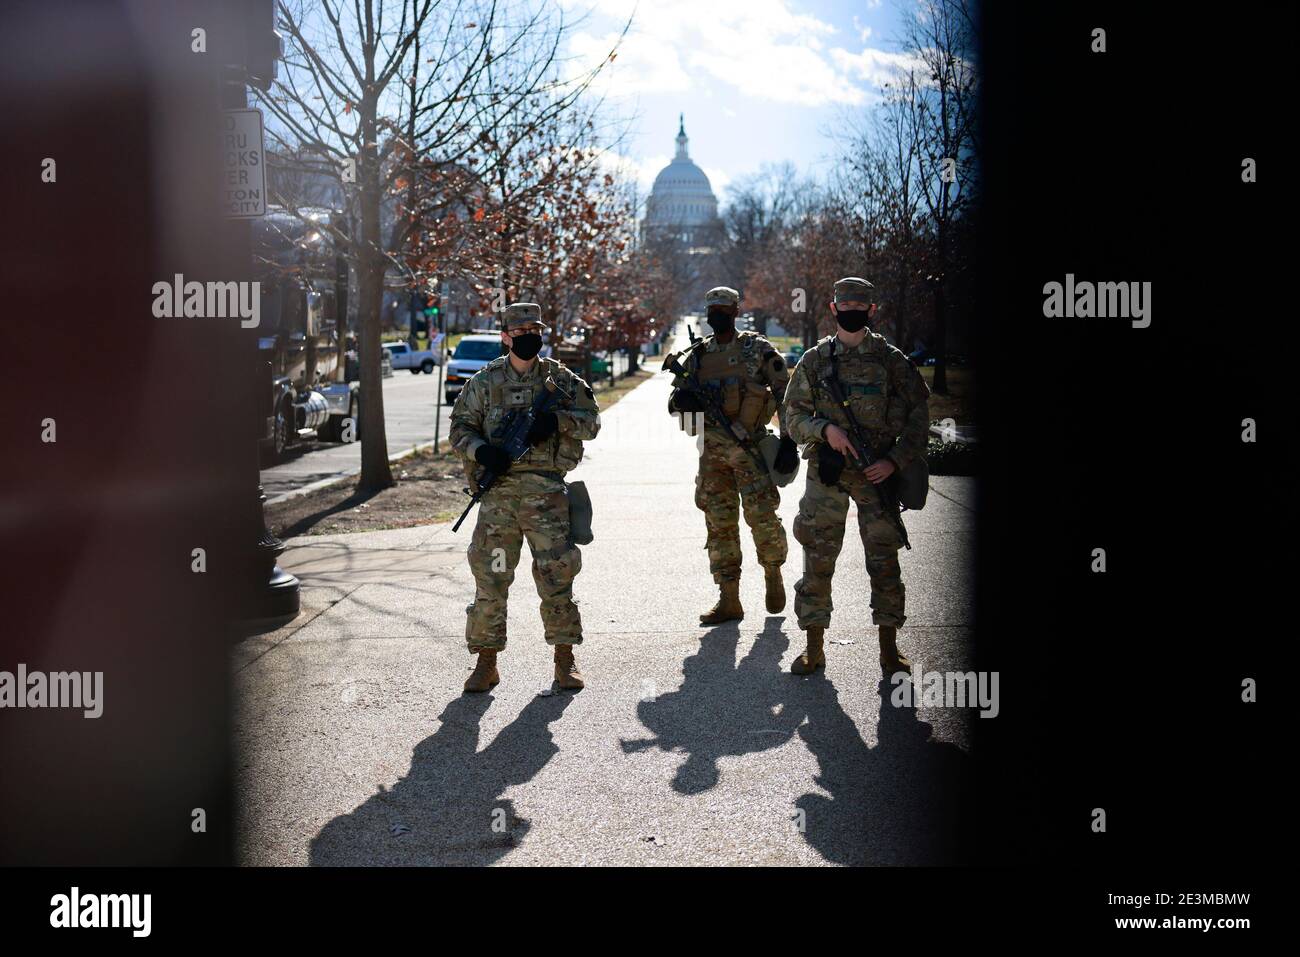 National Guard troops secure the United States Capitol Building on the eve of the inauguration of president elect Joe Biden. Stock Photo